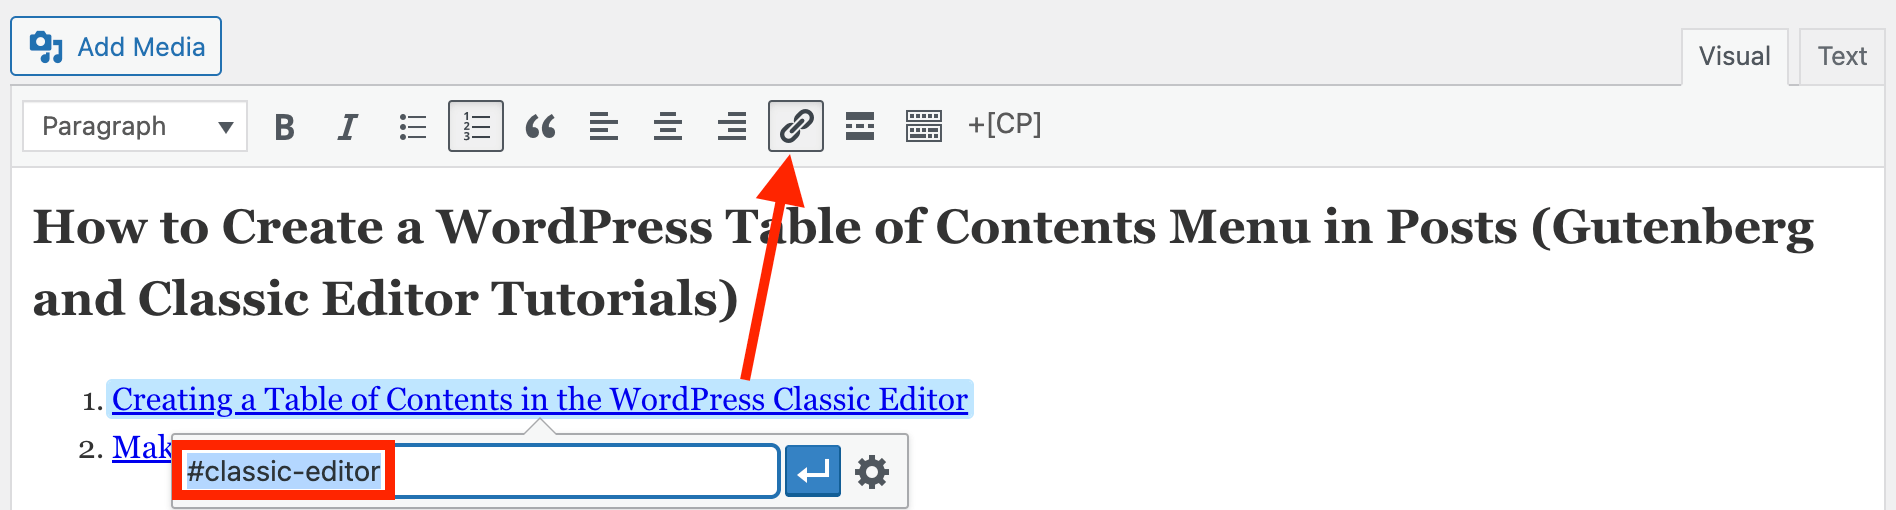 Table of Contents Hyperlink Text (Visual Editor)